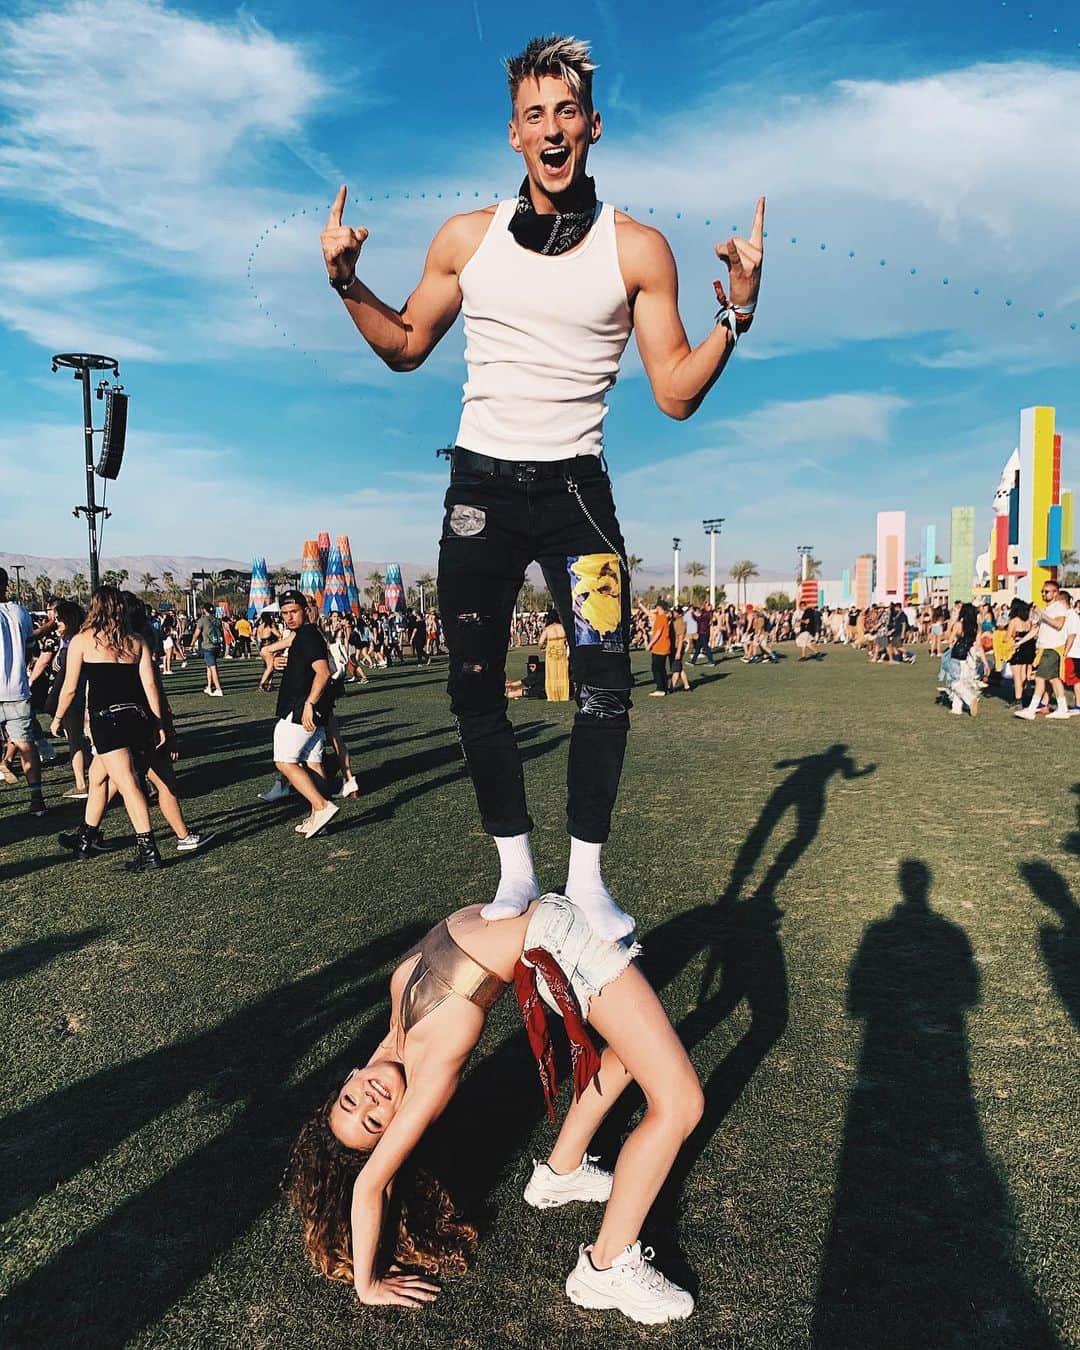 Mark Dohnerのインスタグラム：「so darlin’, darlin’ stand “on” me 😂😂 idk how this was even possible but @sofiedossi is a CHAMP! Coachella was SO MUCH FUN! 🎵 who’s your favorite music artist right now? #coachella」